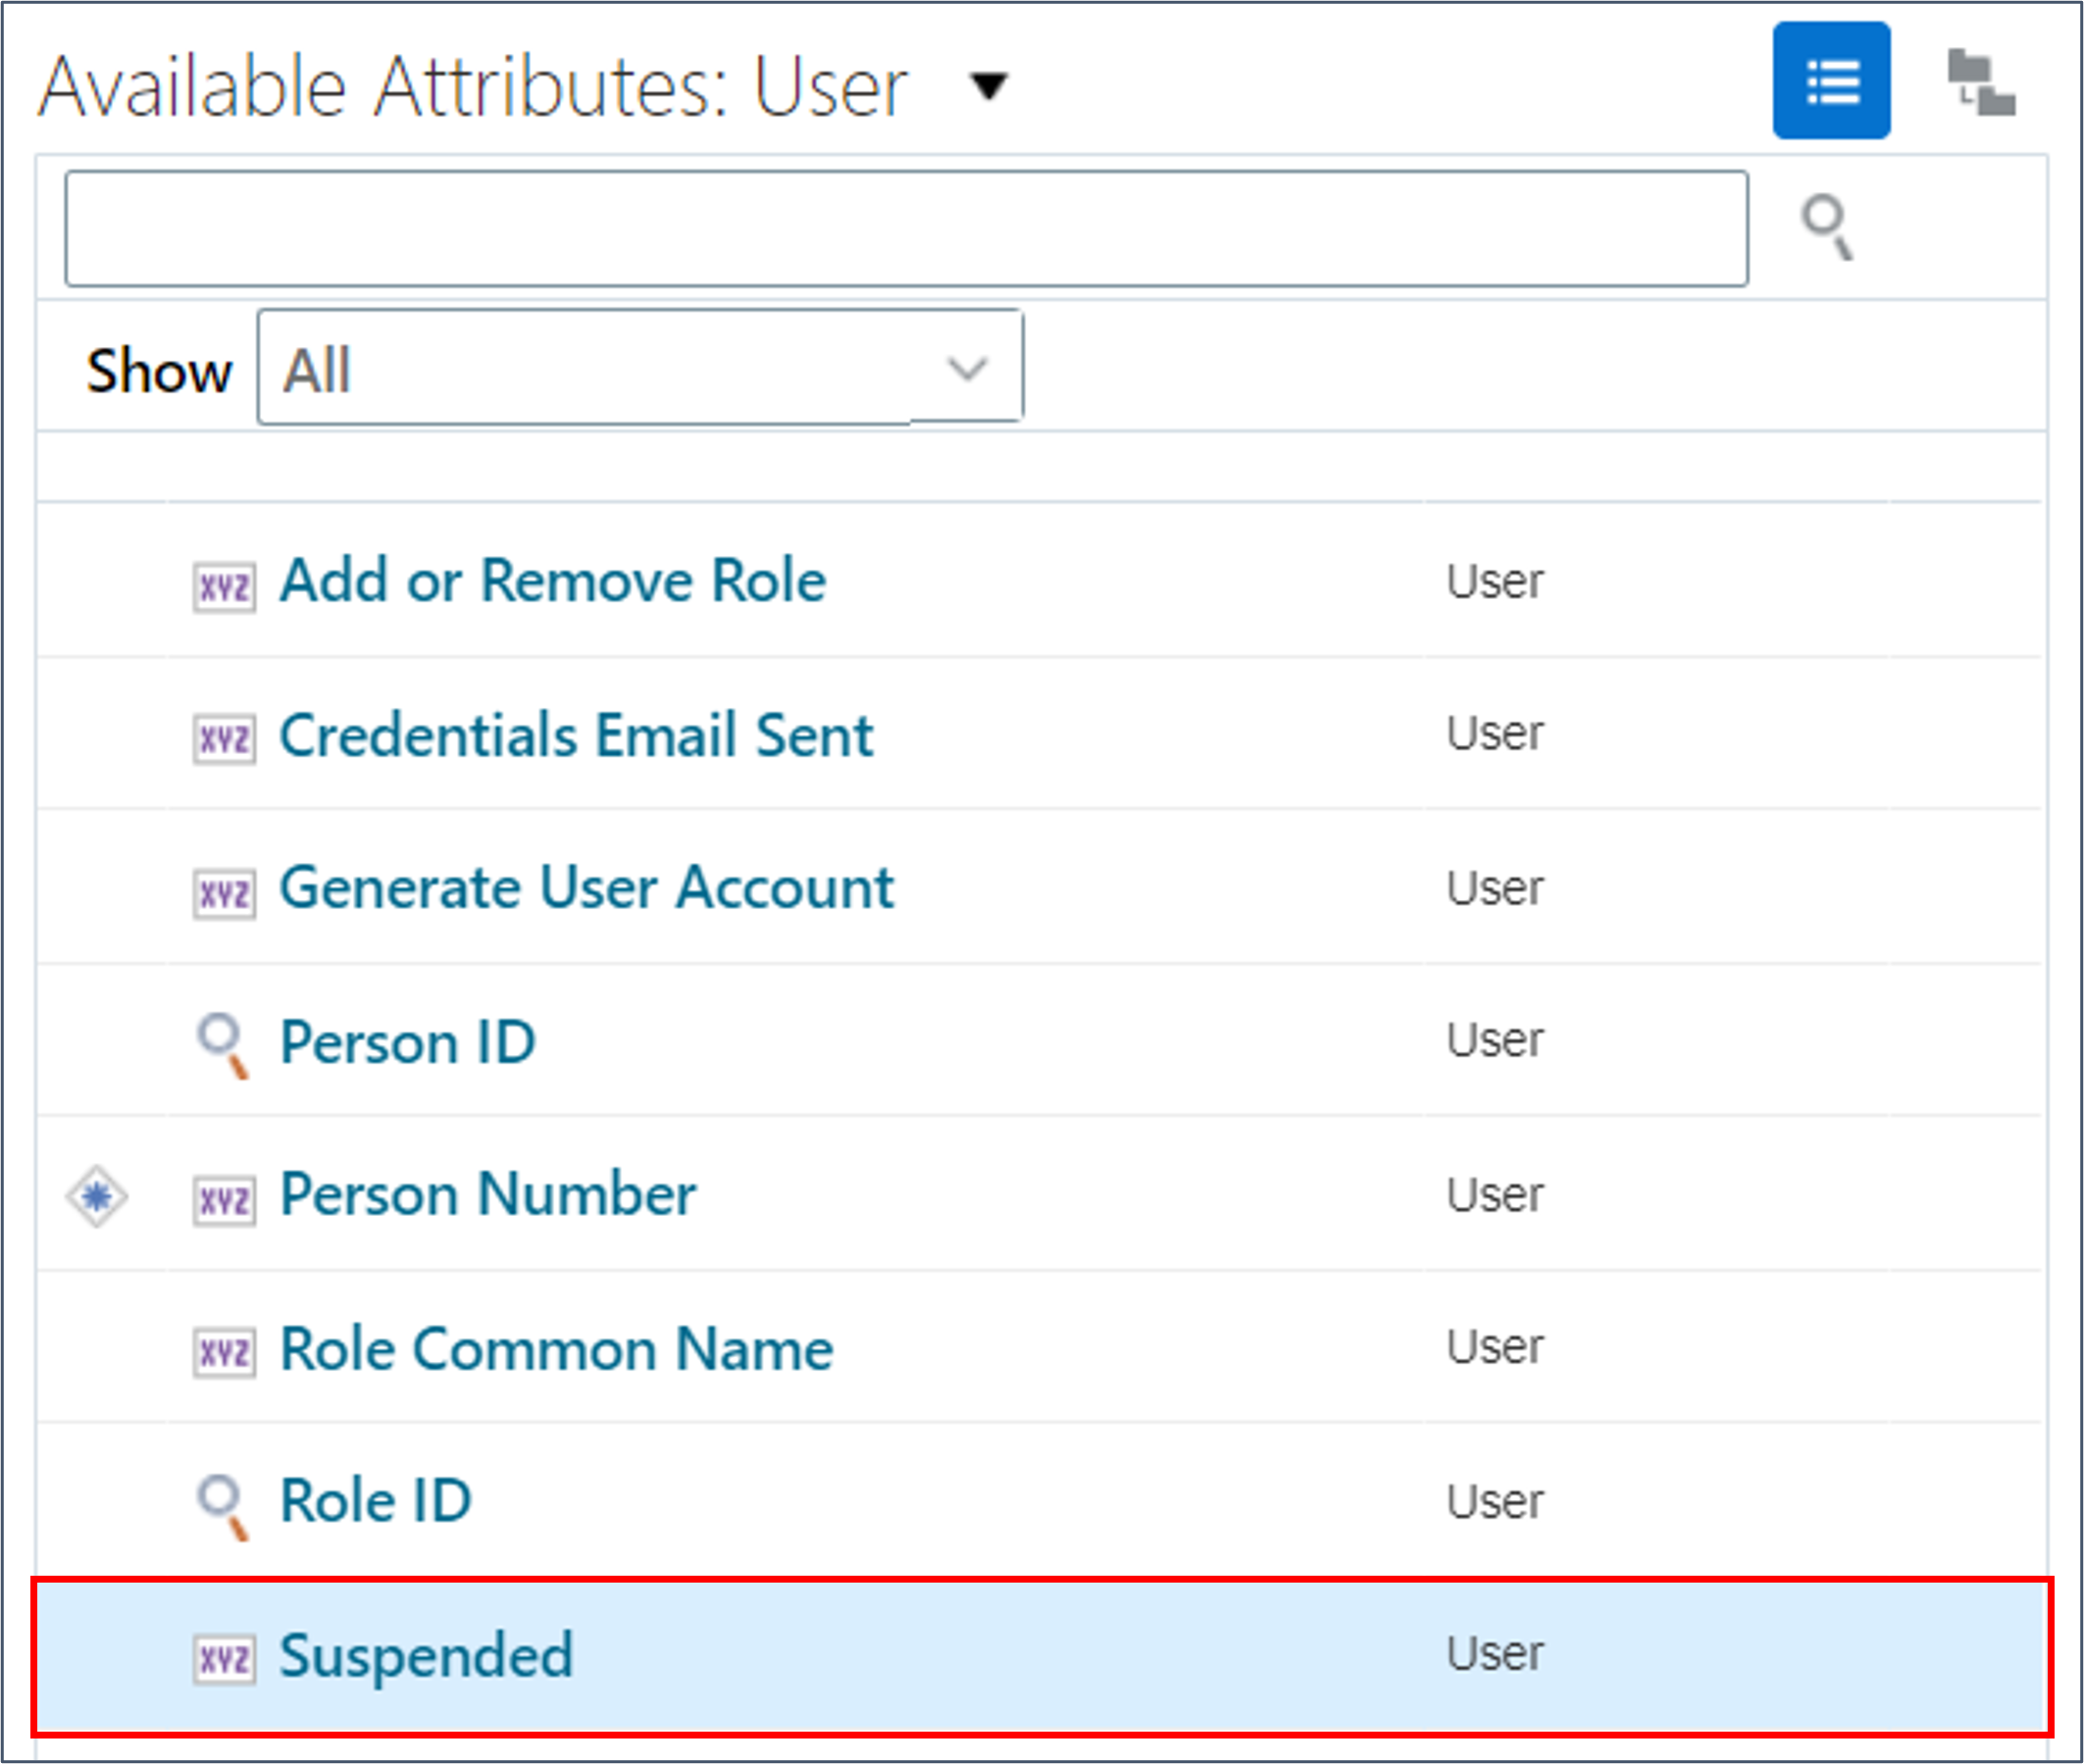 Drag the Suspended attribute into the Selected Attributes panel.